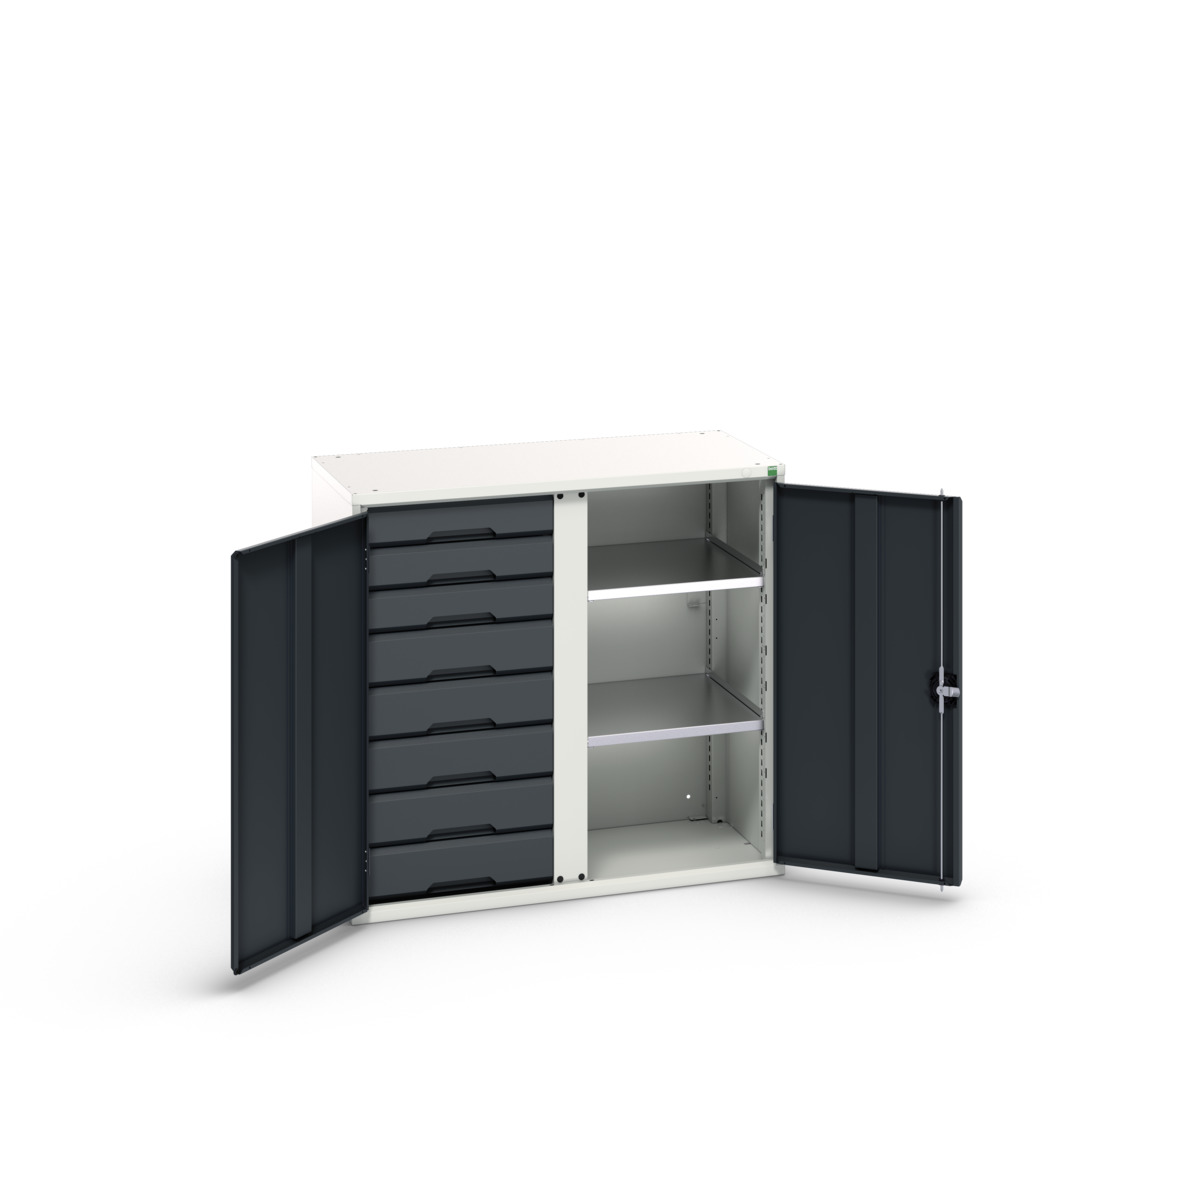 16926558.19 - verso kitted cupboard